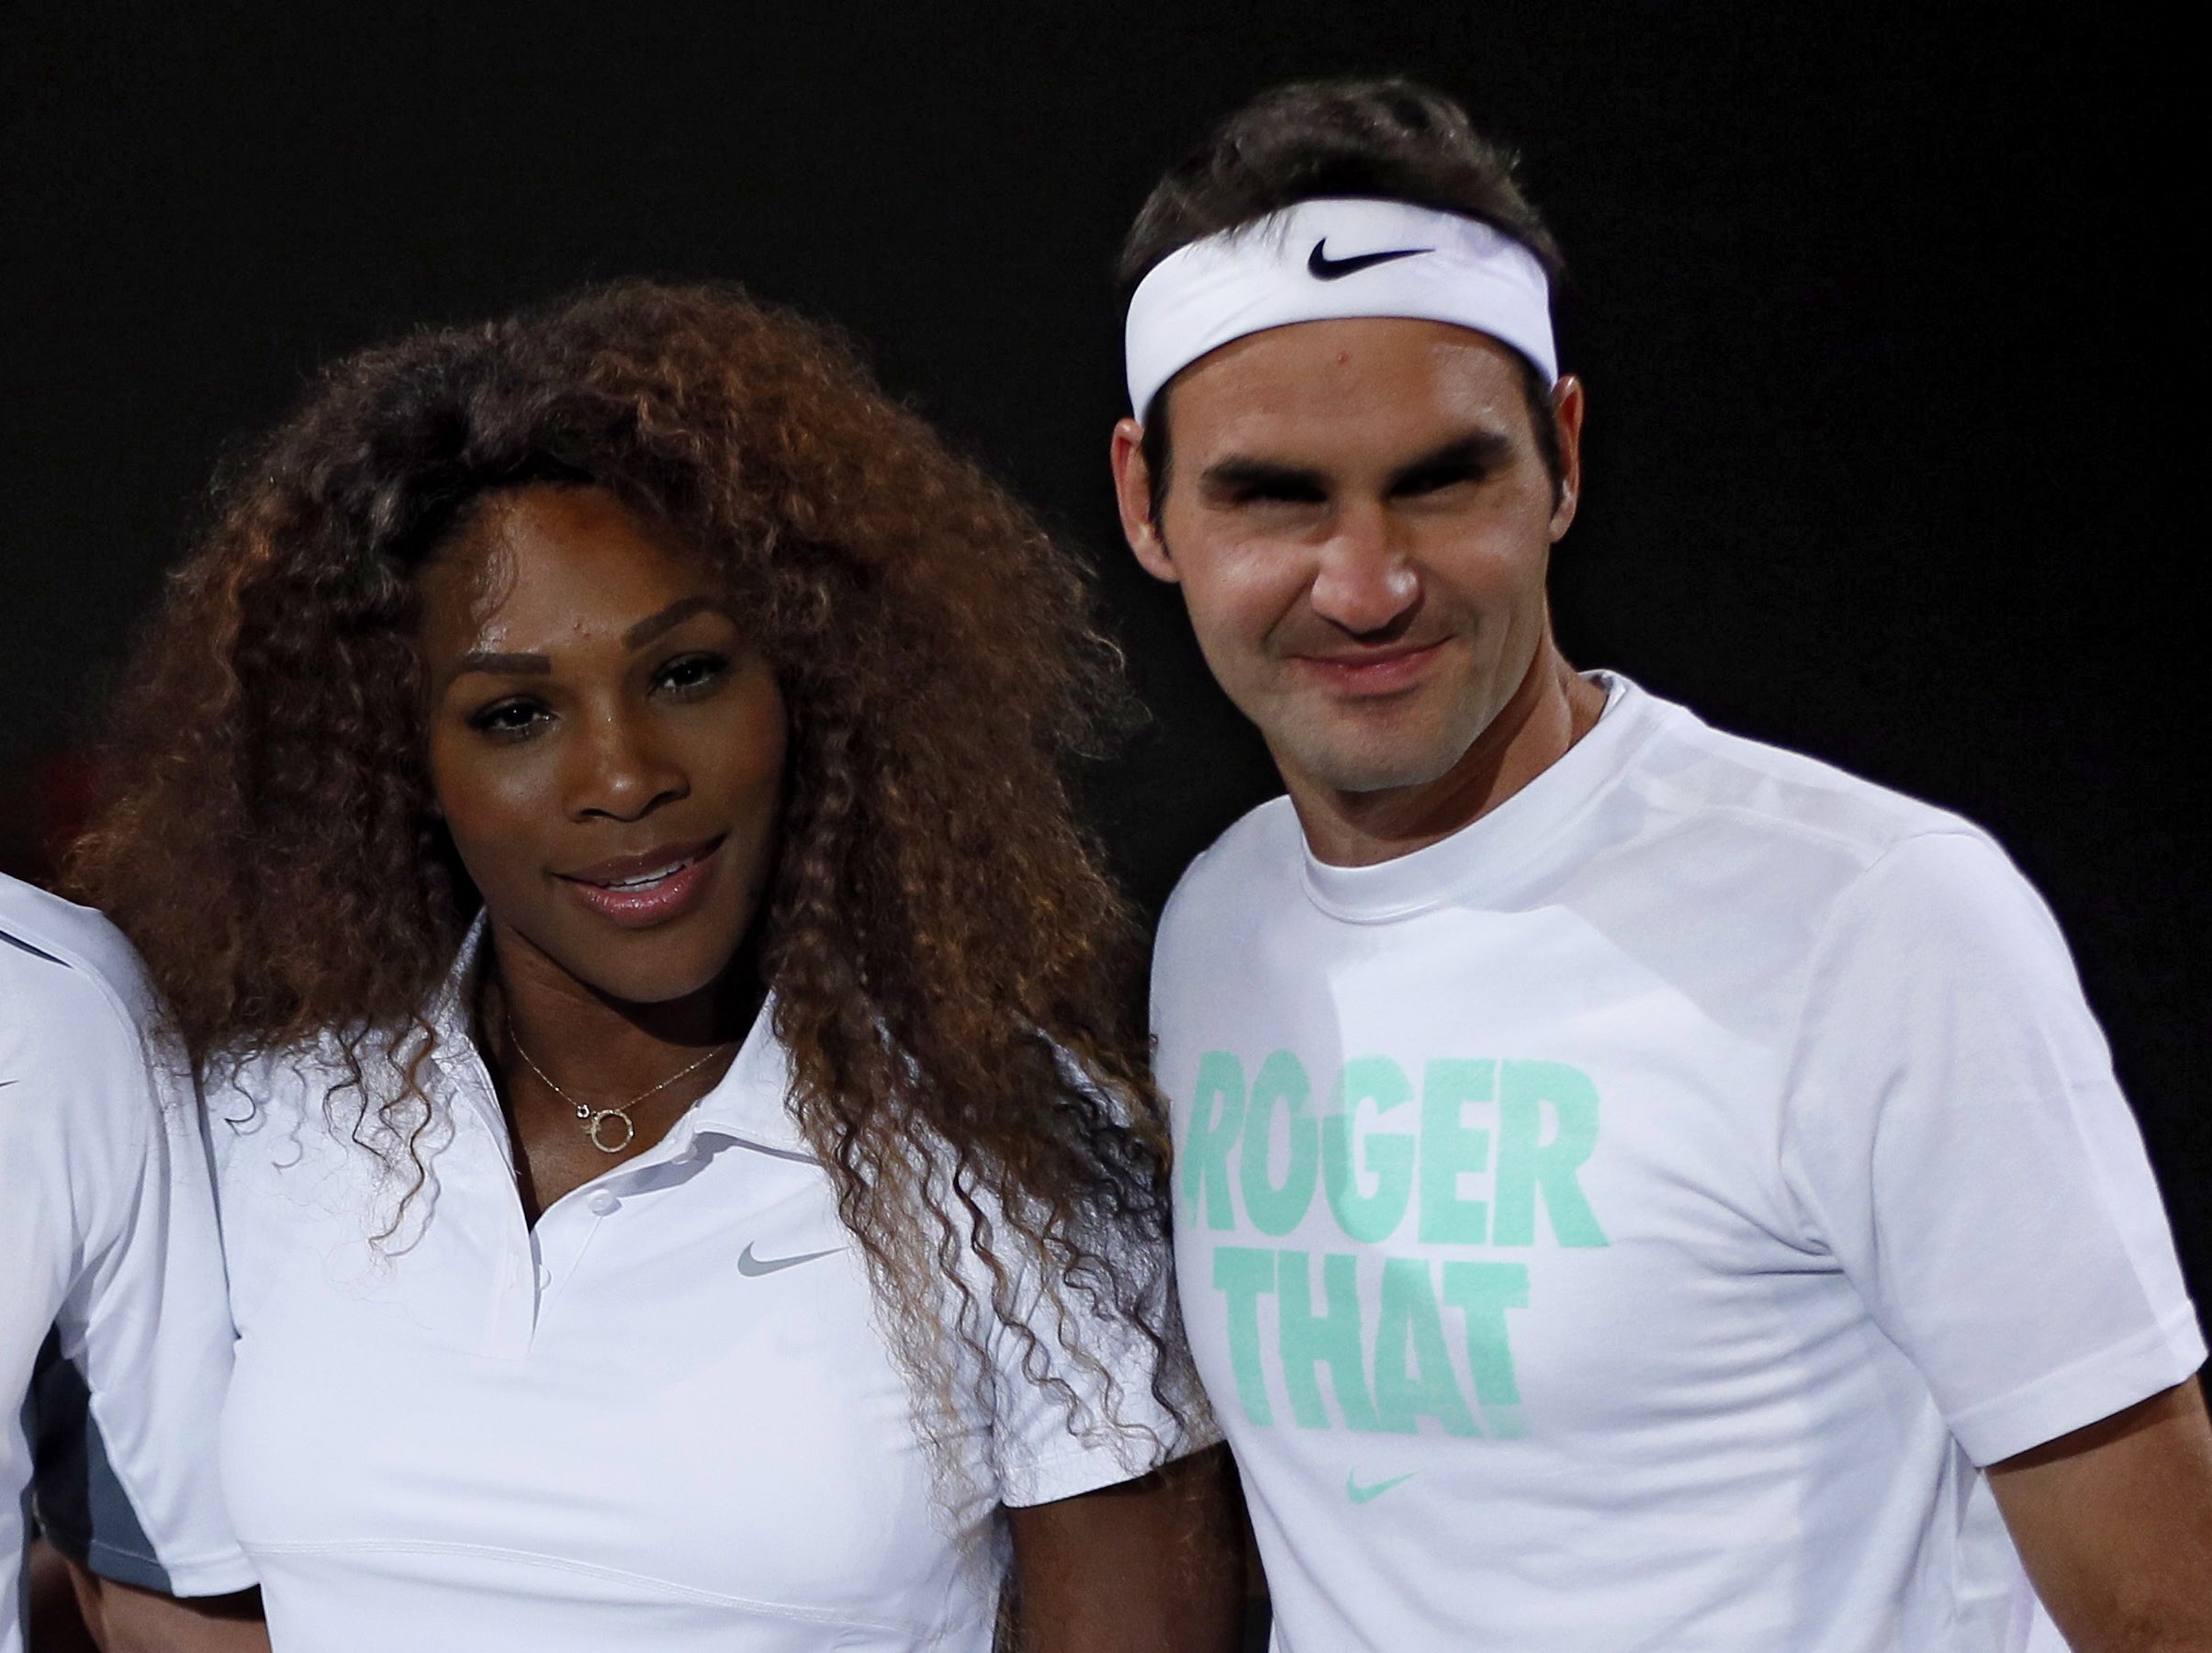 Serena and Roger: Two of the greatest ever